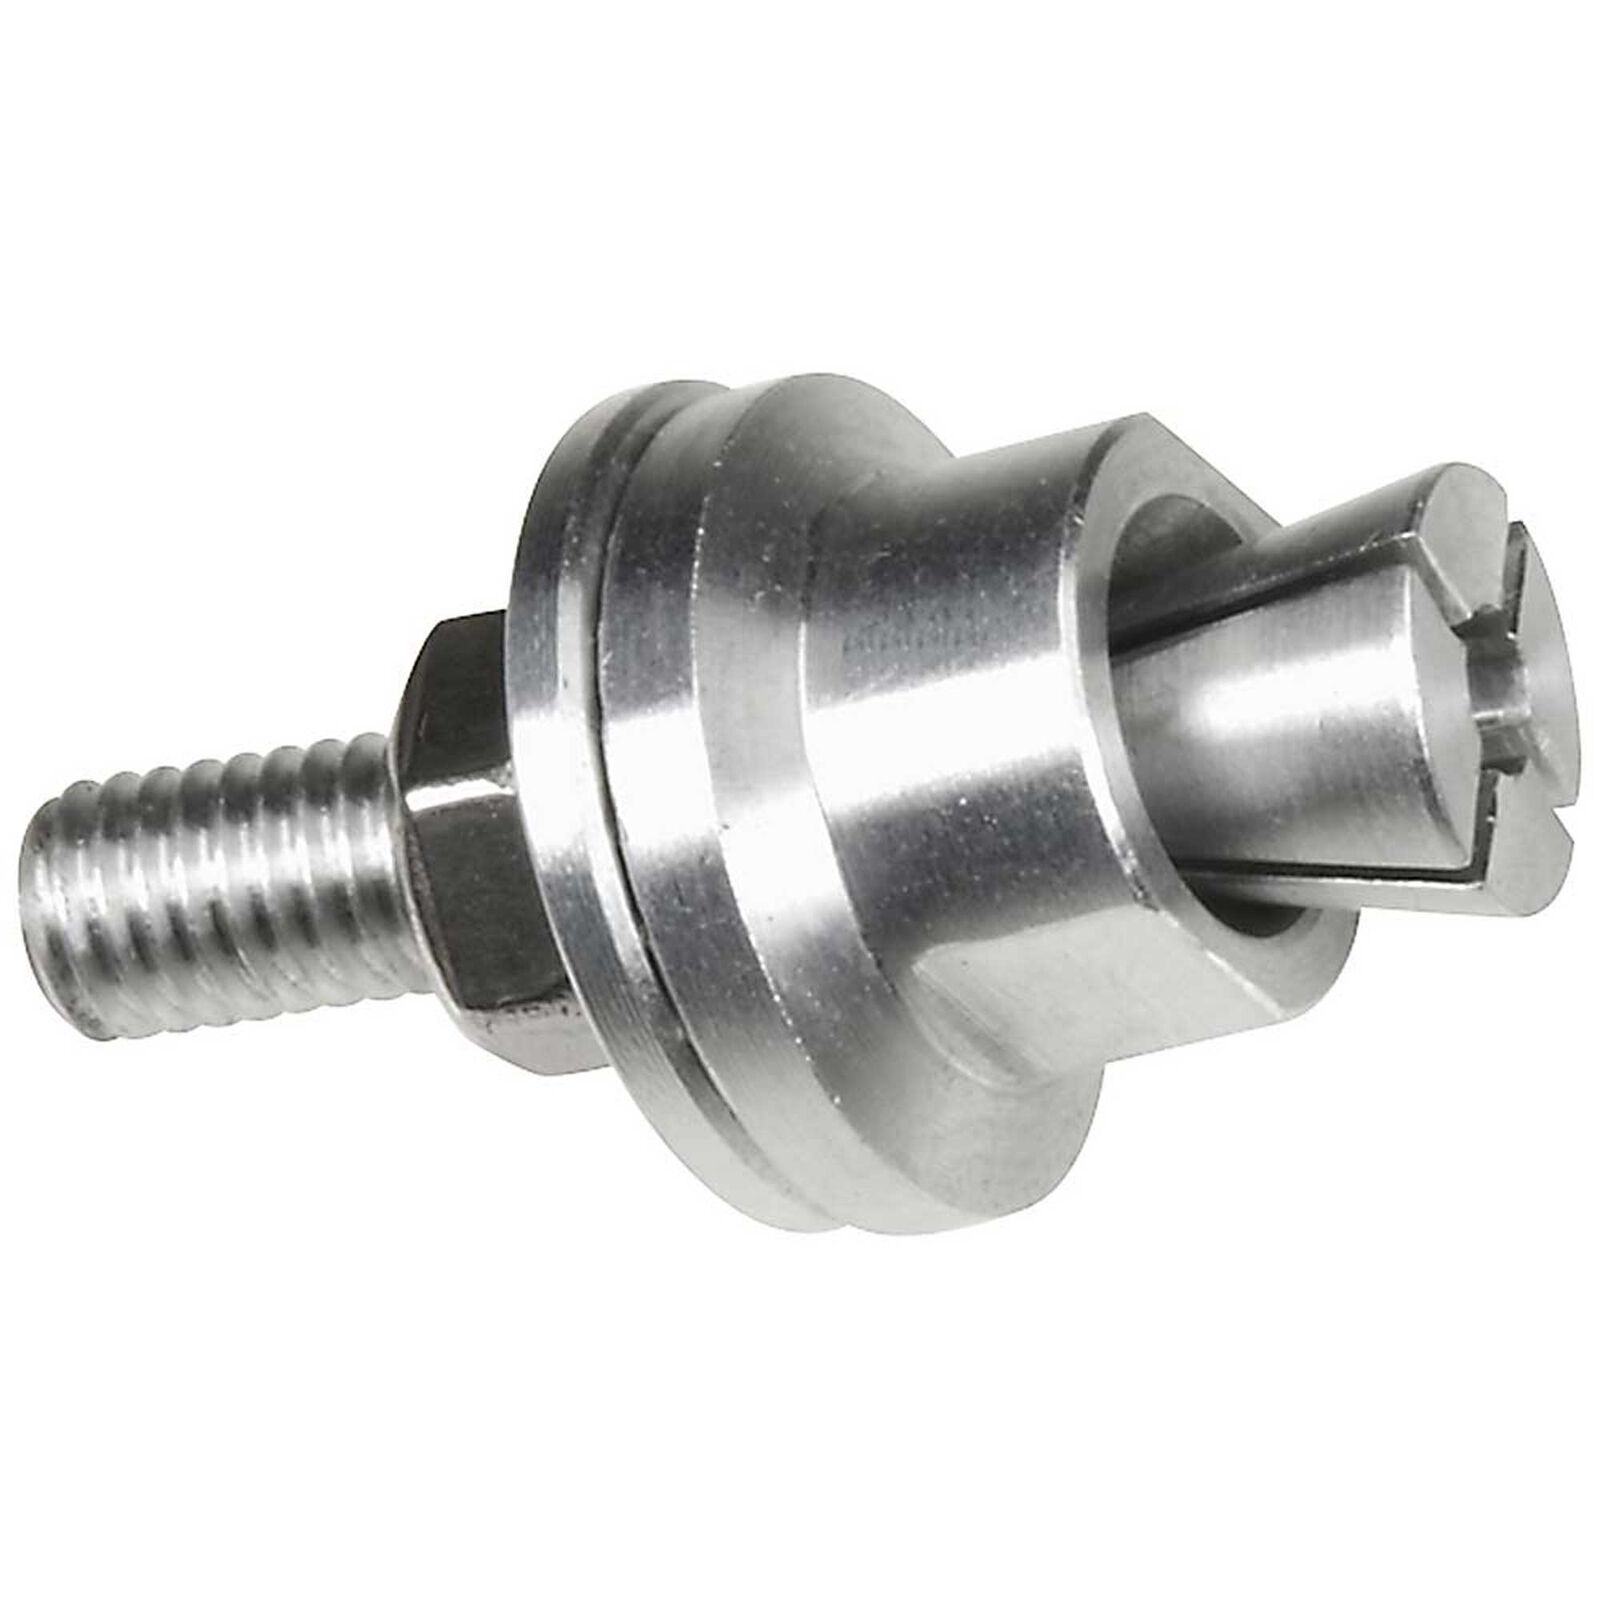 Details about  / Propeller Adapter - High Quality 5 Pieces Collet Type 3mm 5mm Shaft